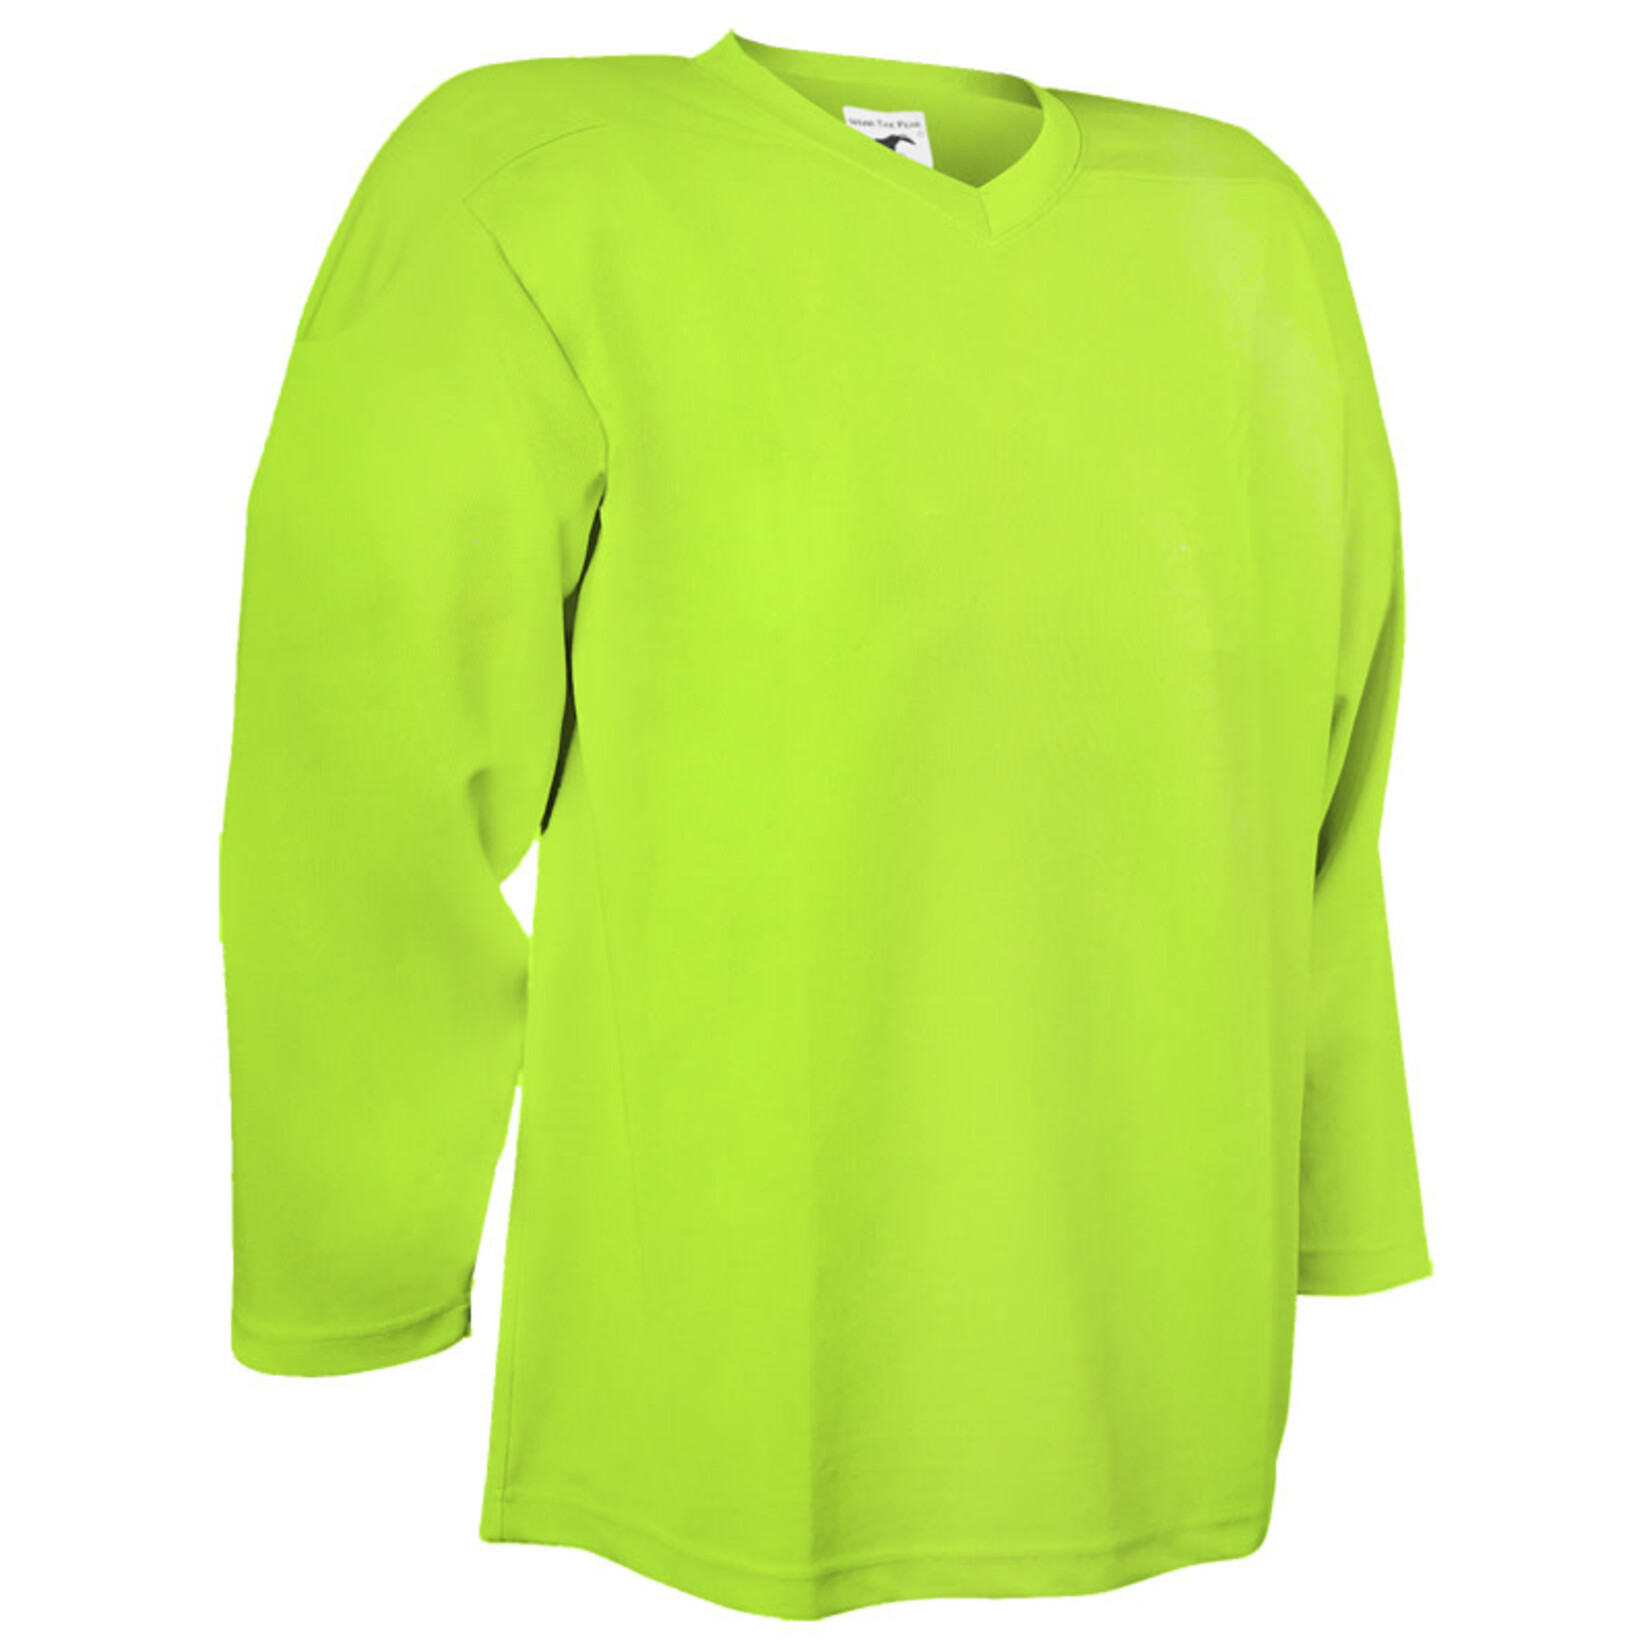 Pear Sox Pear Sox Air Mesh Practice Jersey (YOUTH NEON YELLOW)